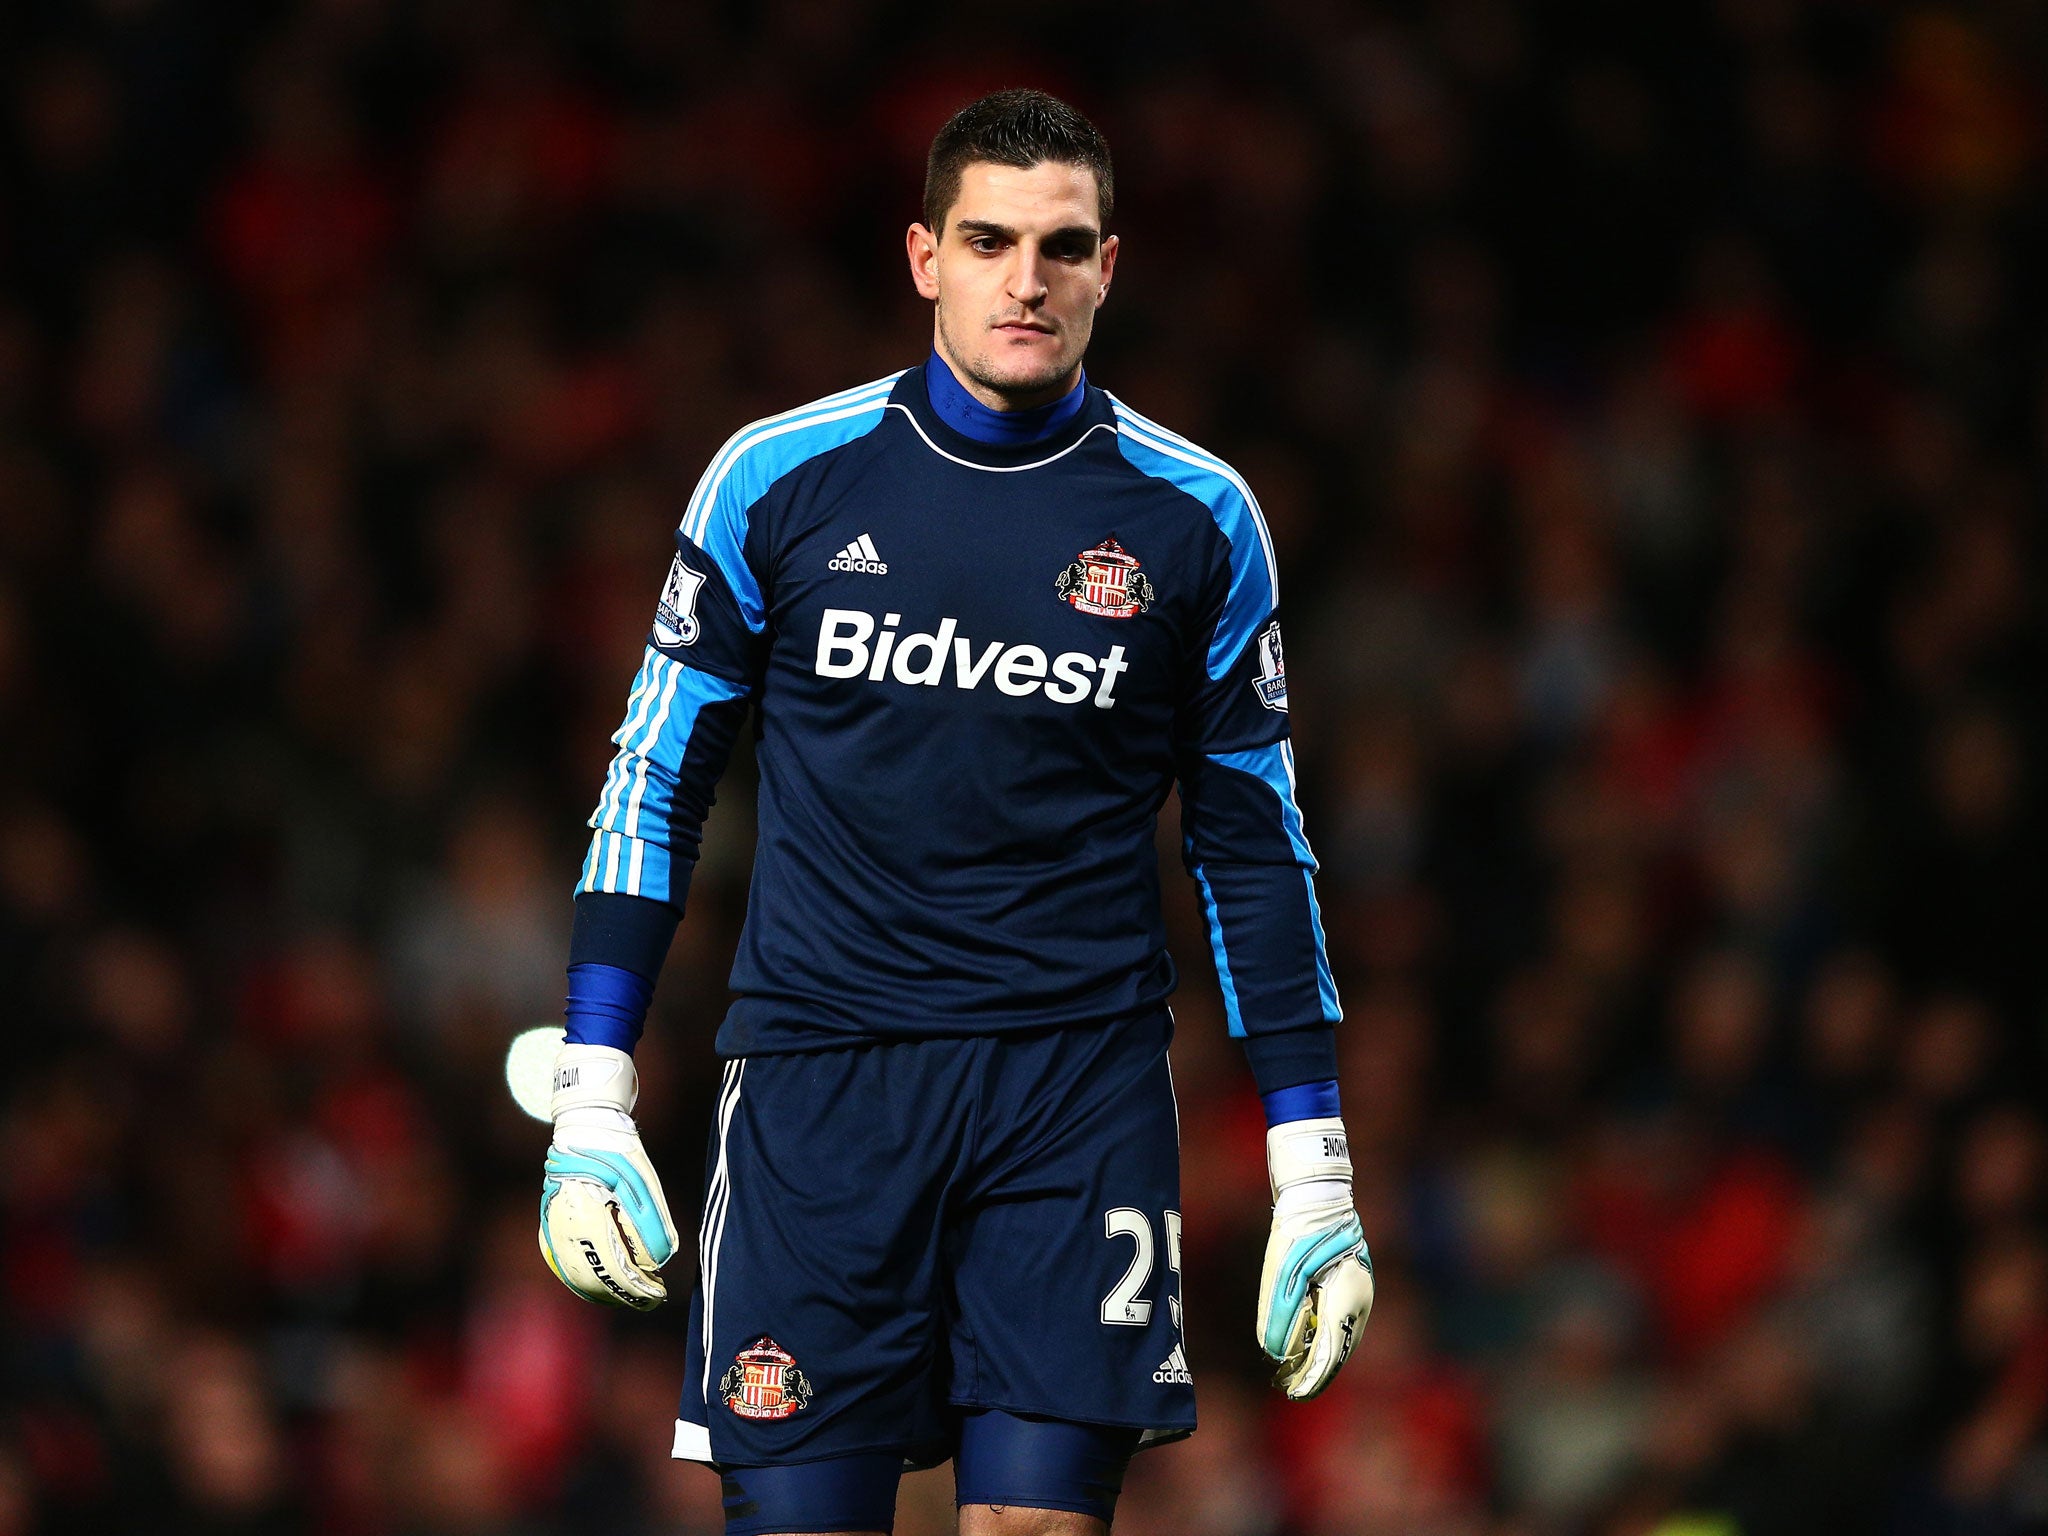 Vito Mannone was Sunderland's hero in the penalty shootout victory over Manchester United